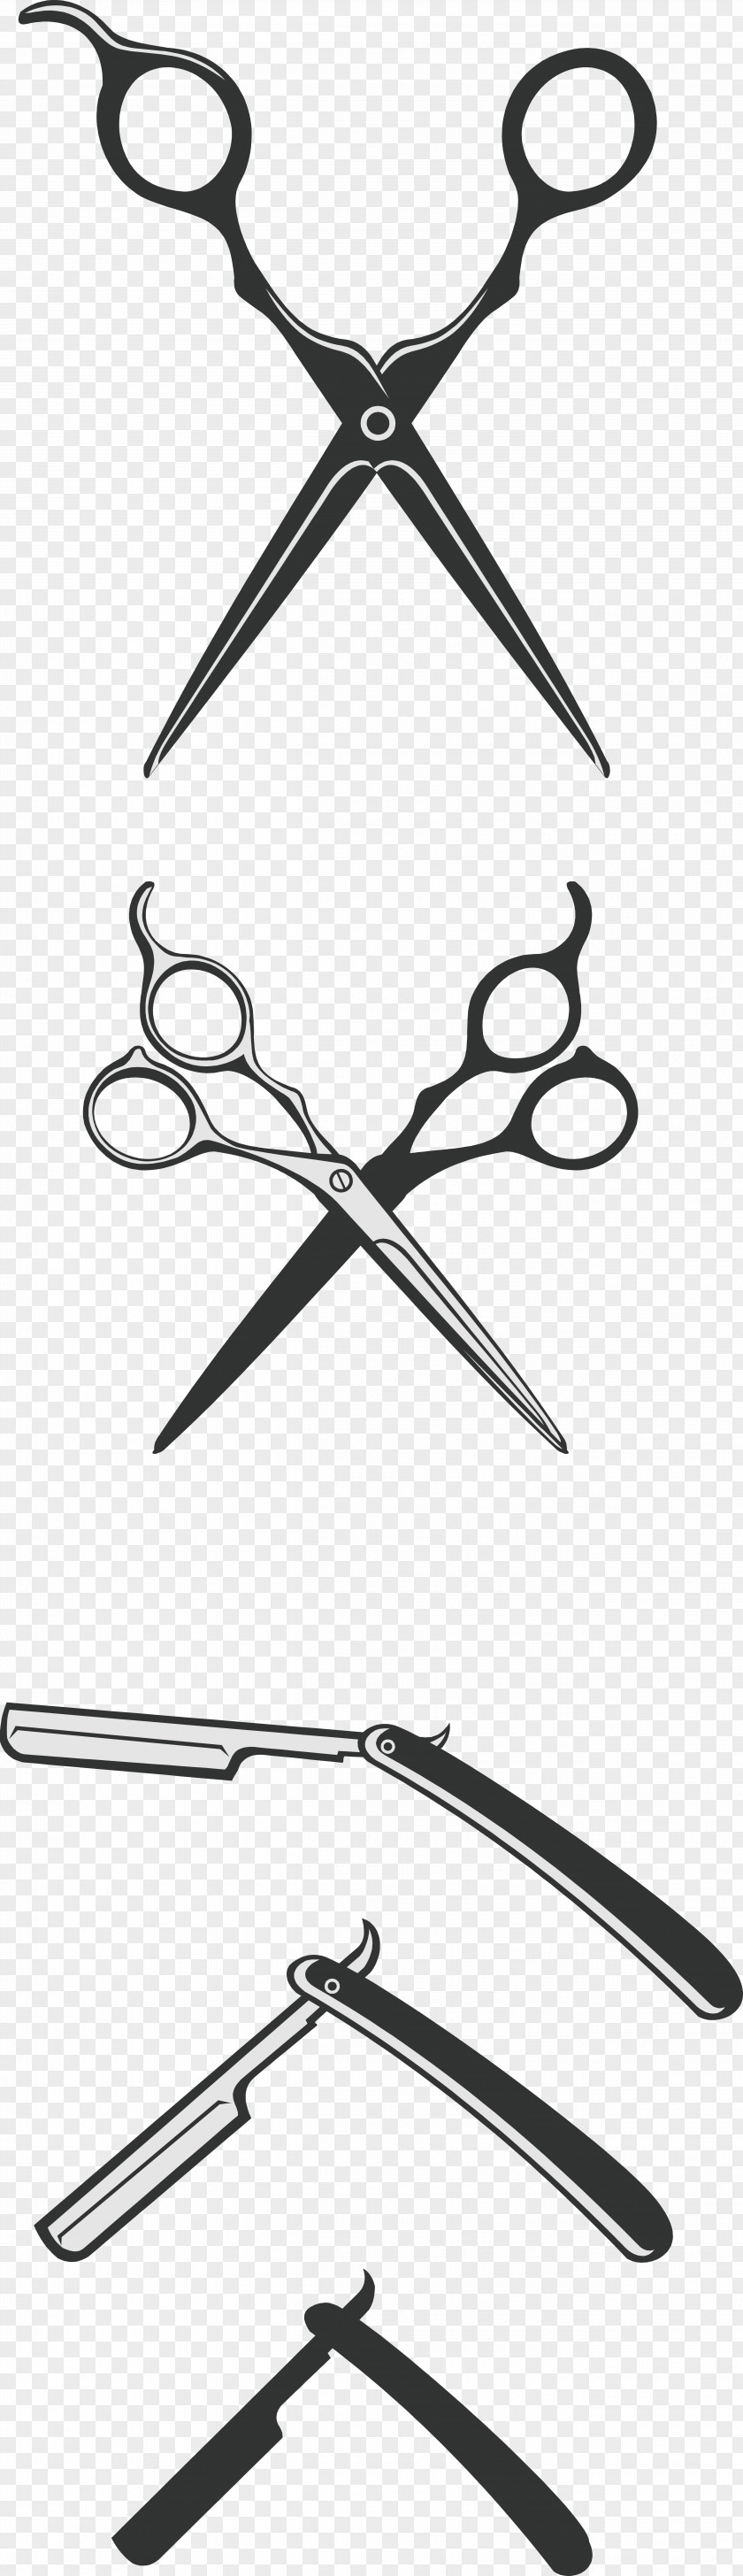 Barber Tools Comb Hair Care PNG